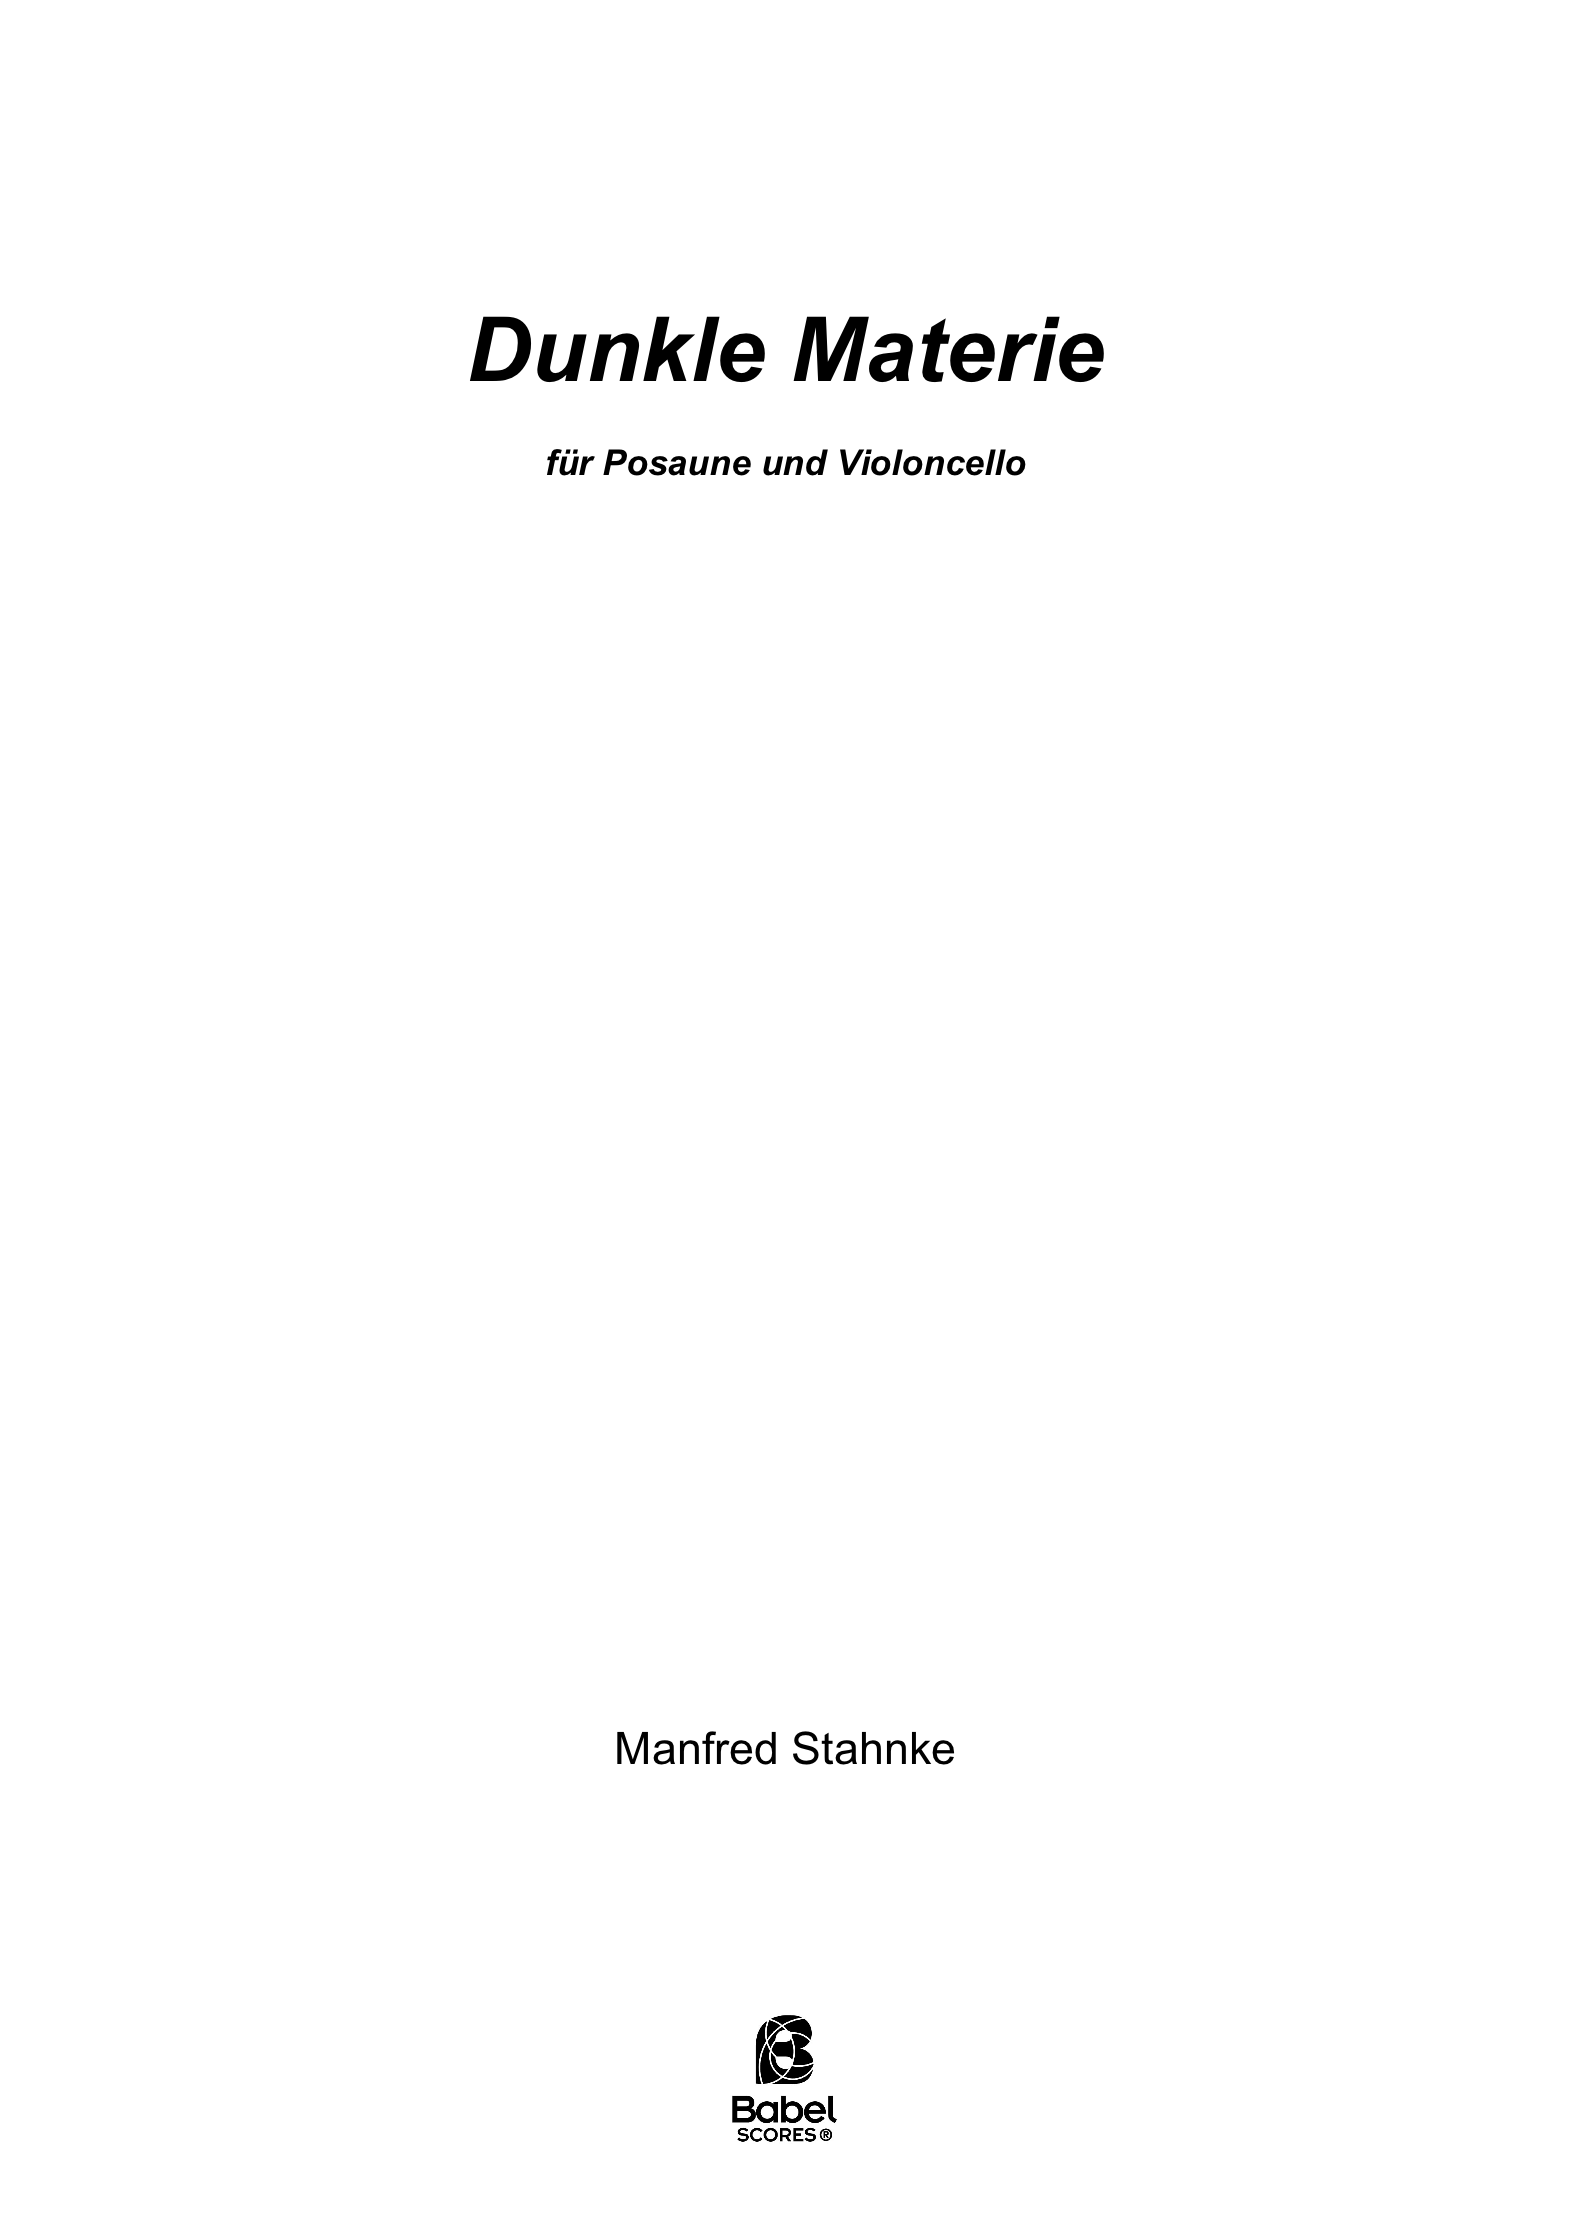 Dunkle Materie A4 z 2 252 1 567